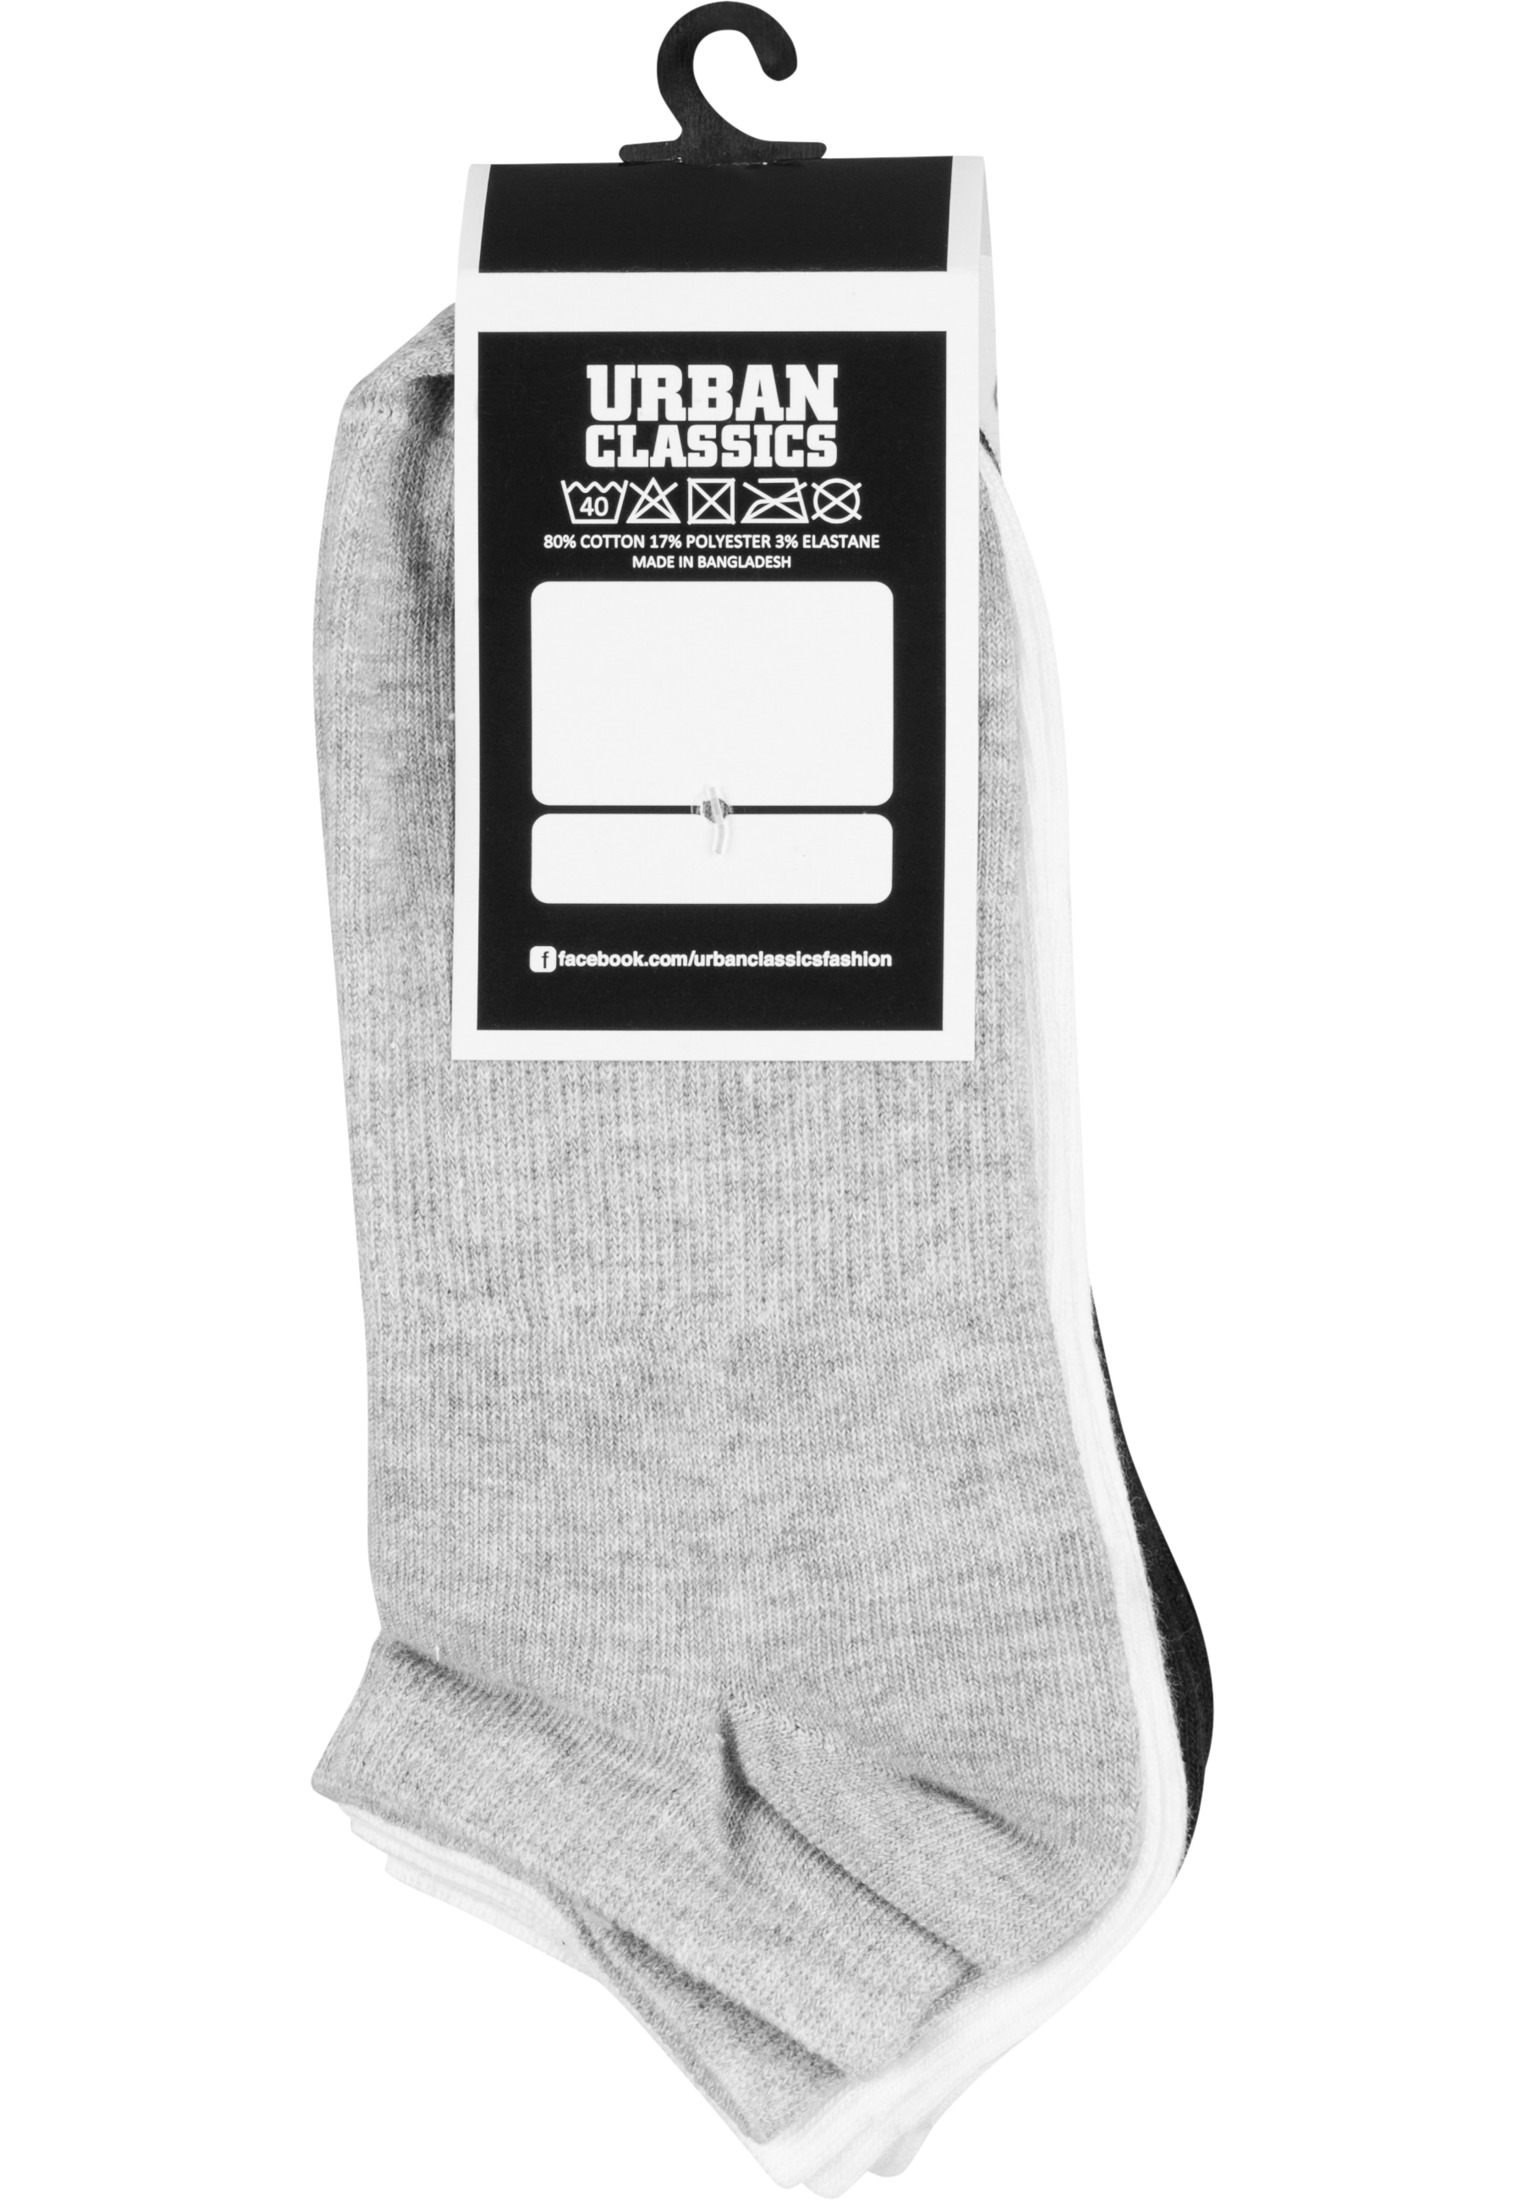 Socken No Show Socks 5-Pack in Farbe blk/wht/gry